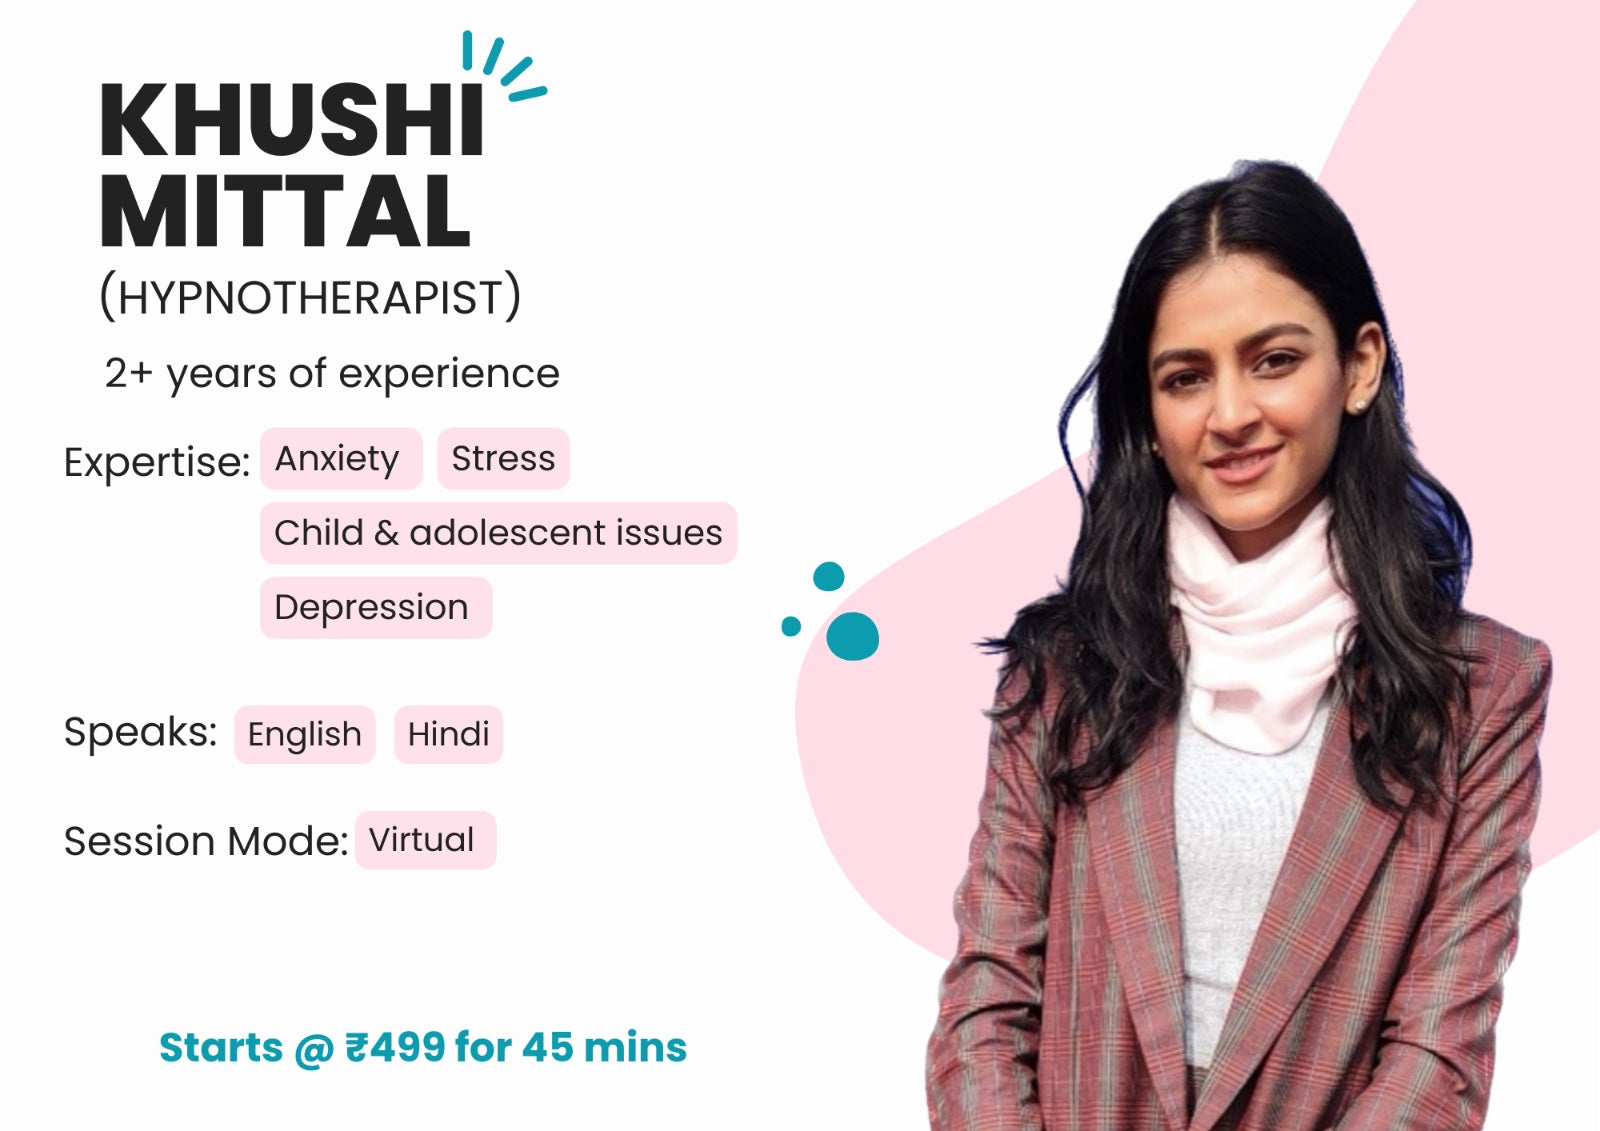 Hypnotherapy with Khushi Mittal